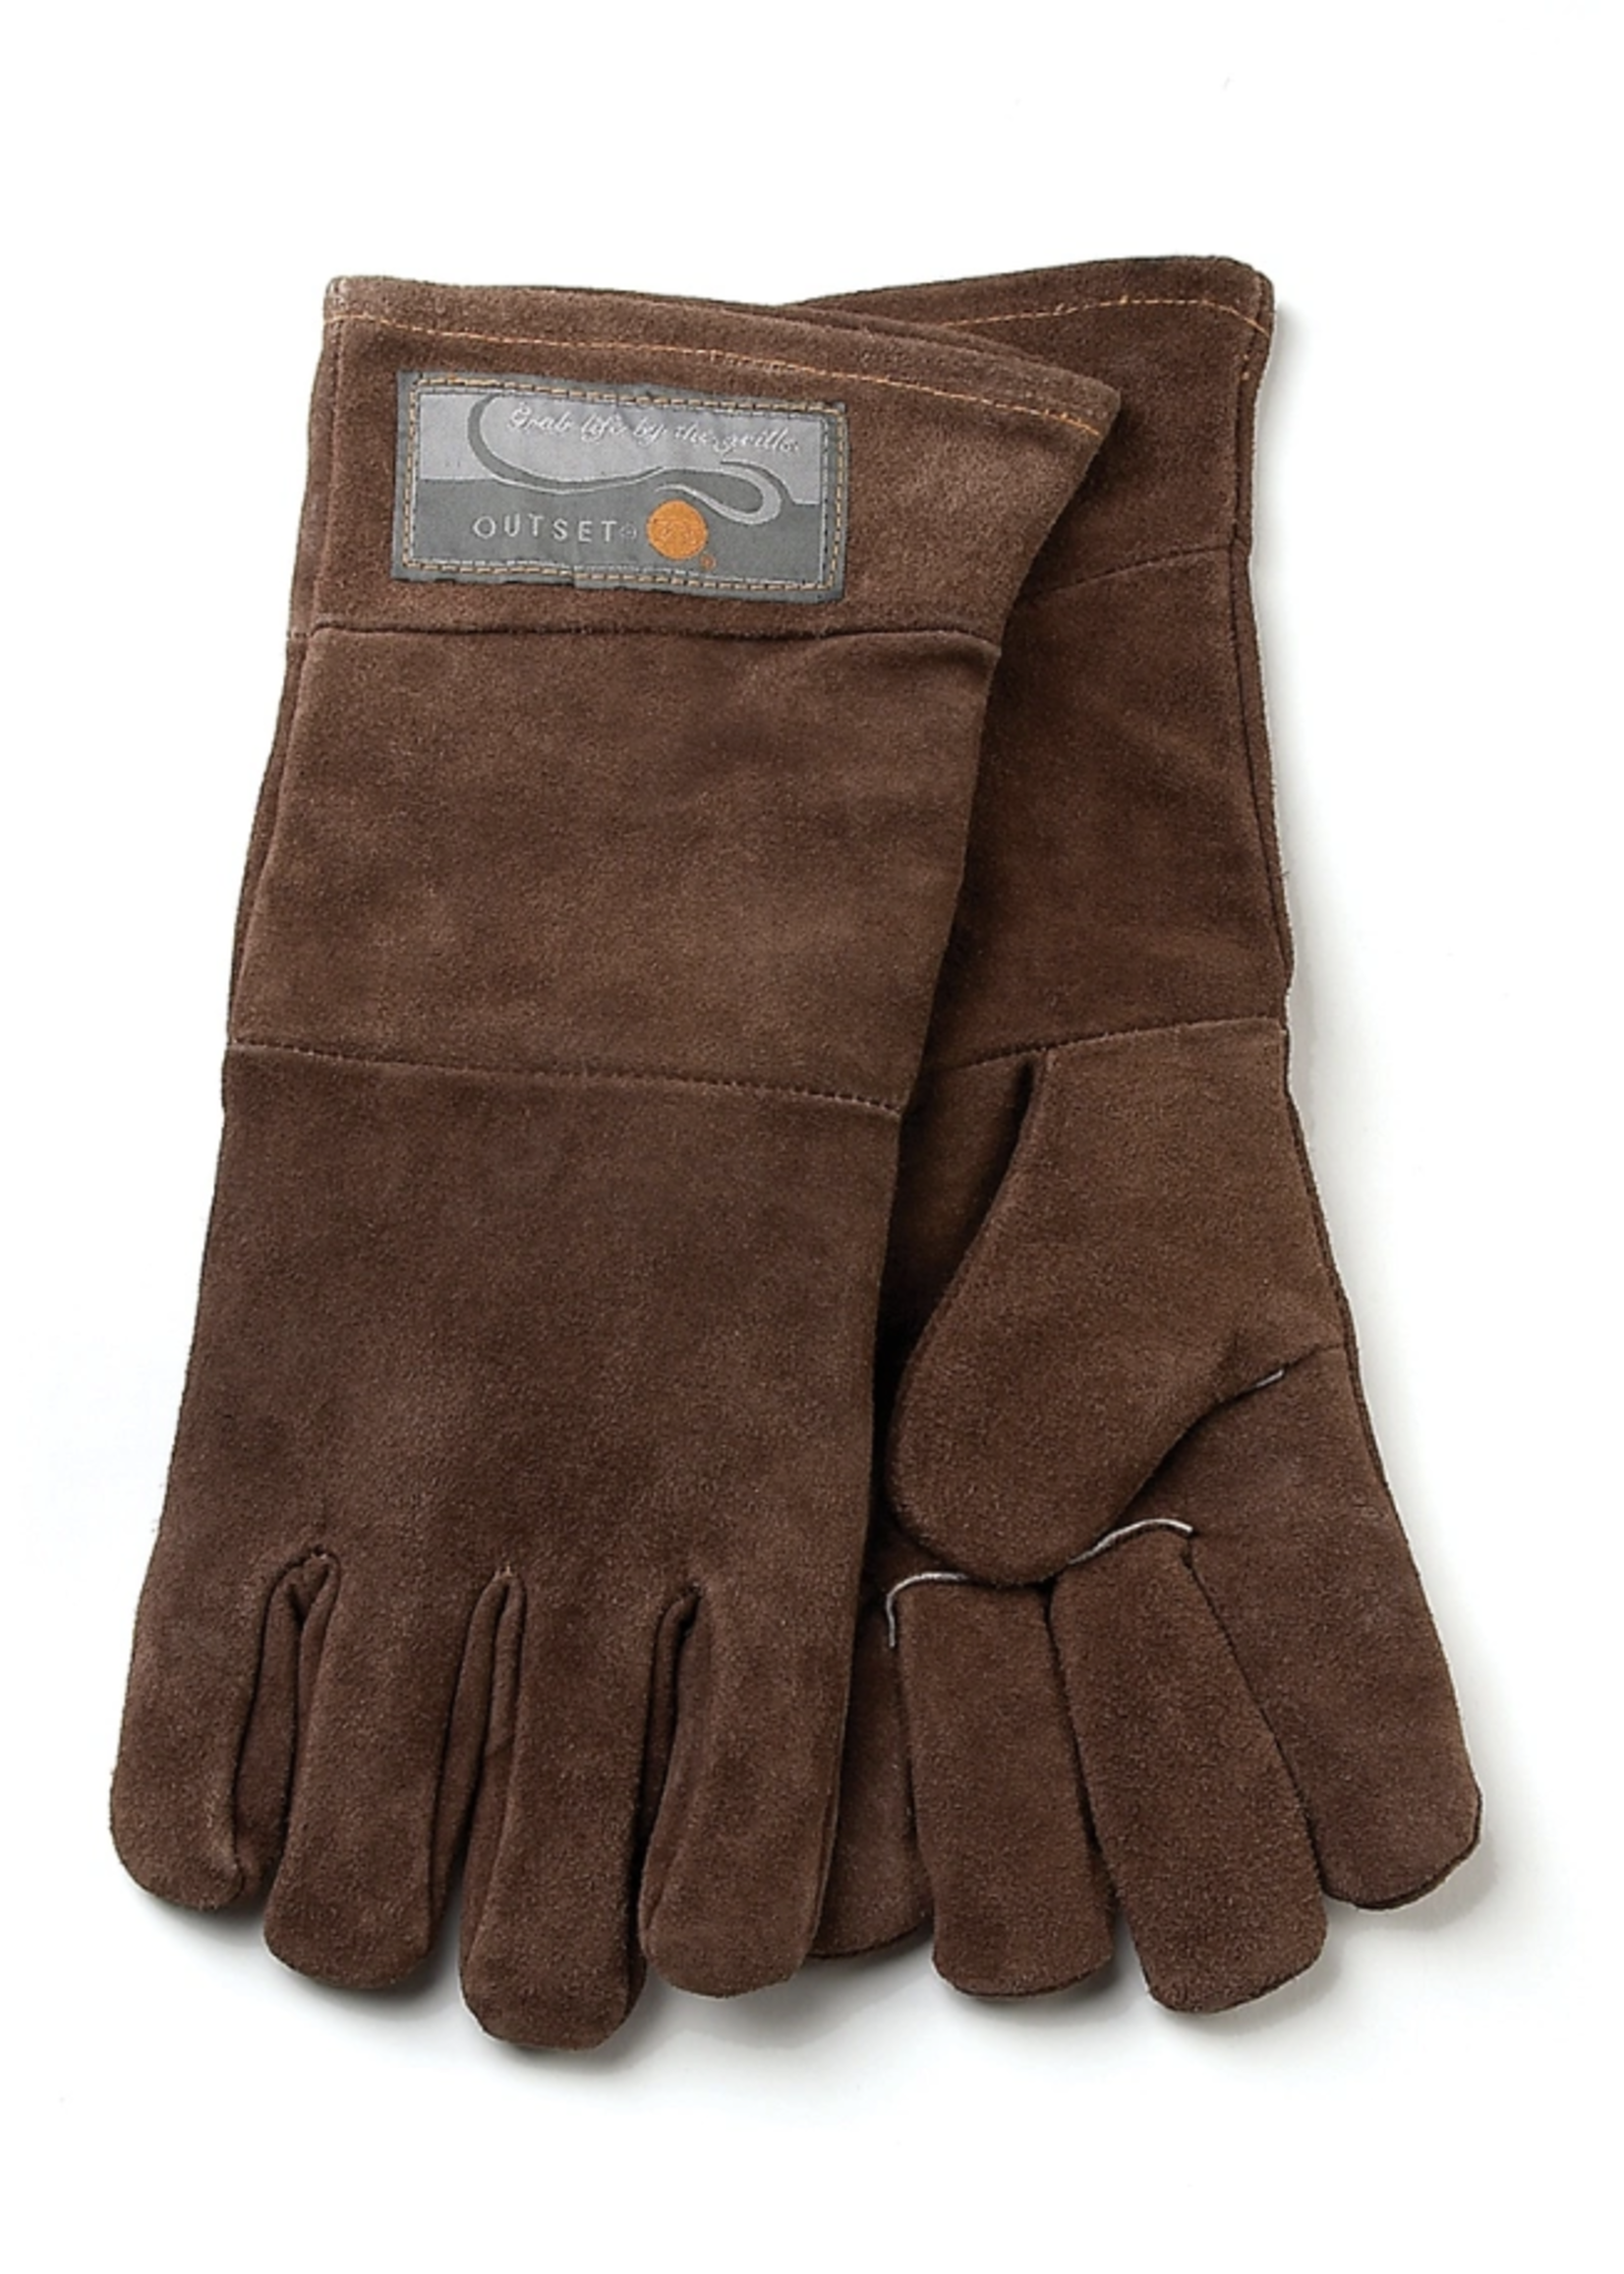 Outset Brown Leather Grill Gloves 15"